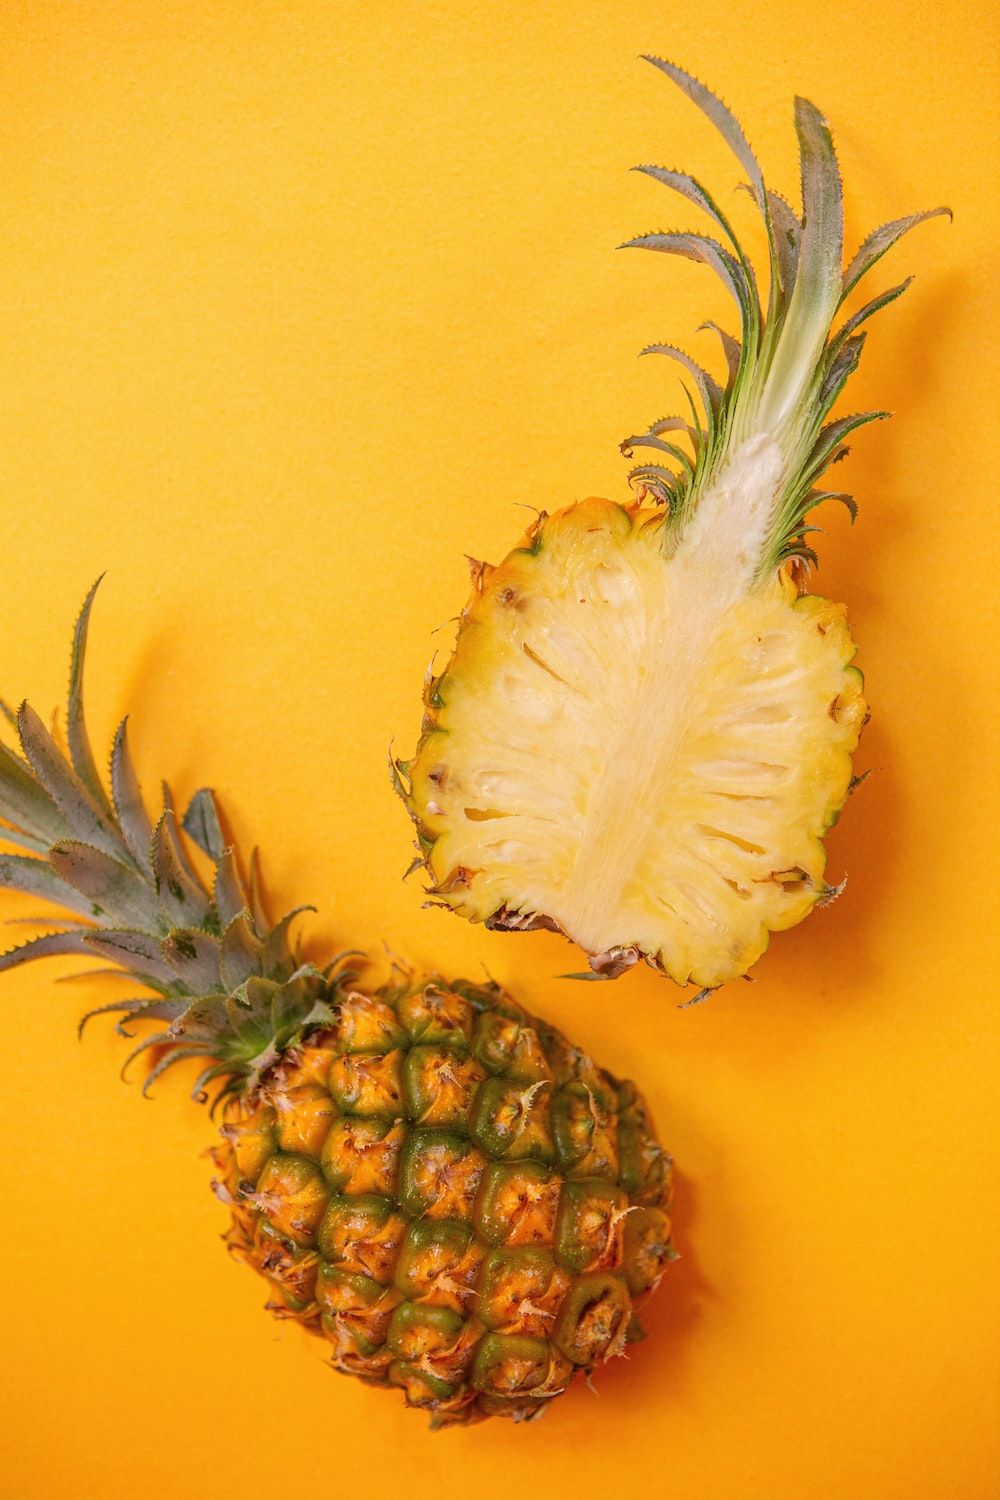 Pineapple Picture. Download Free Image